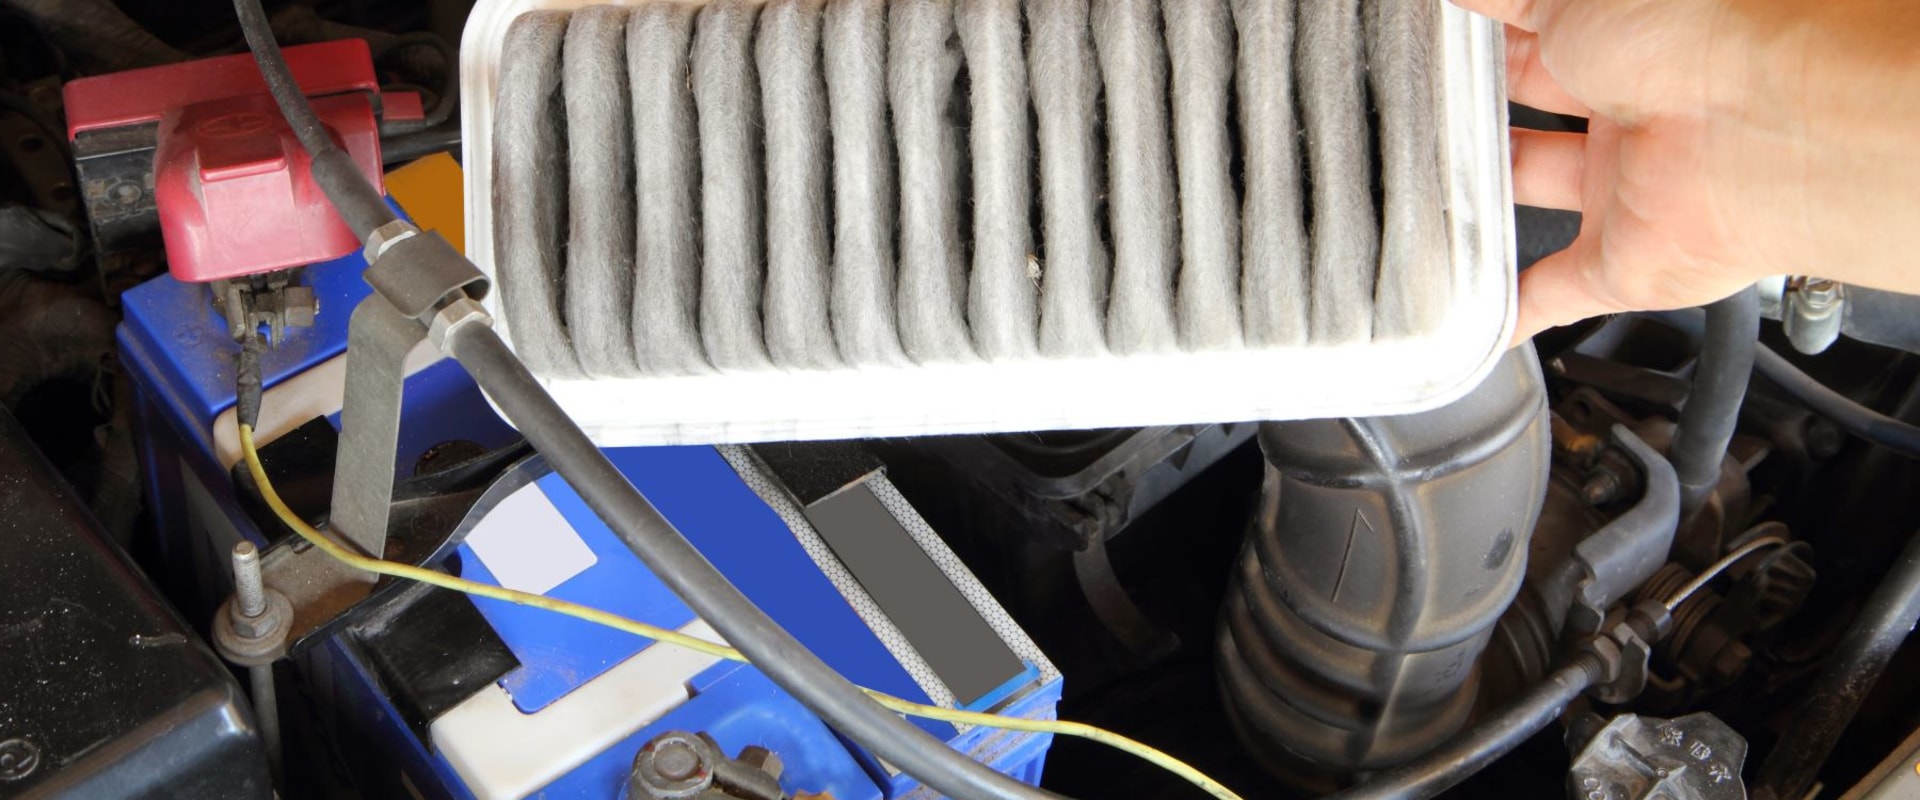 Can a Dirty Air Filter Damage Your Car's Engine?